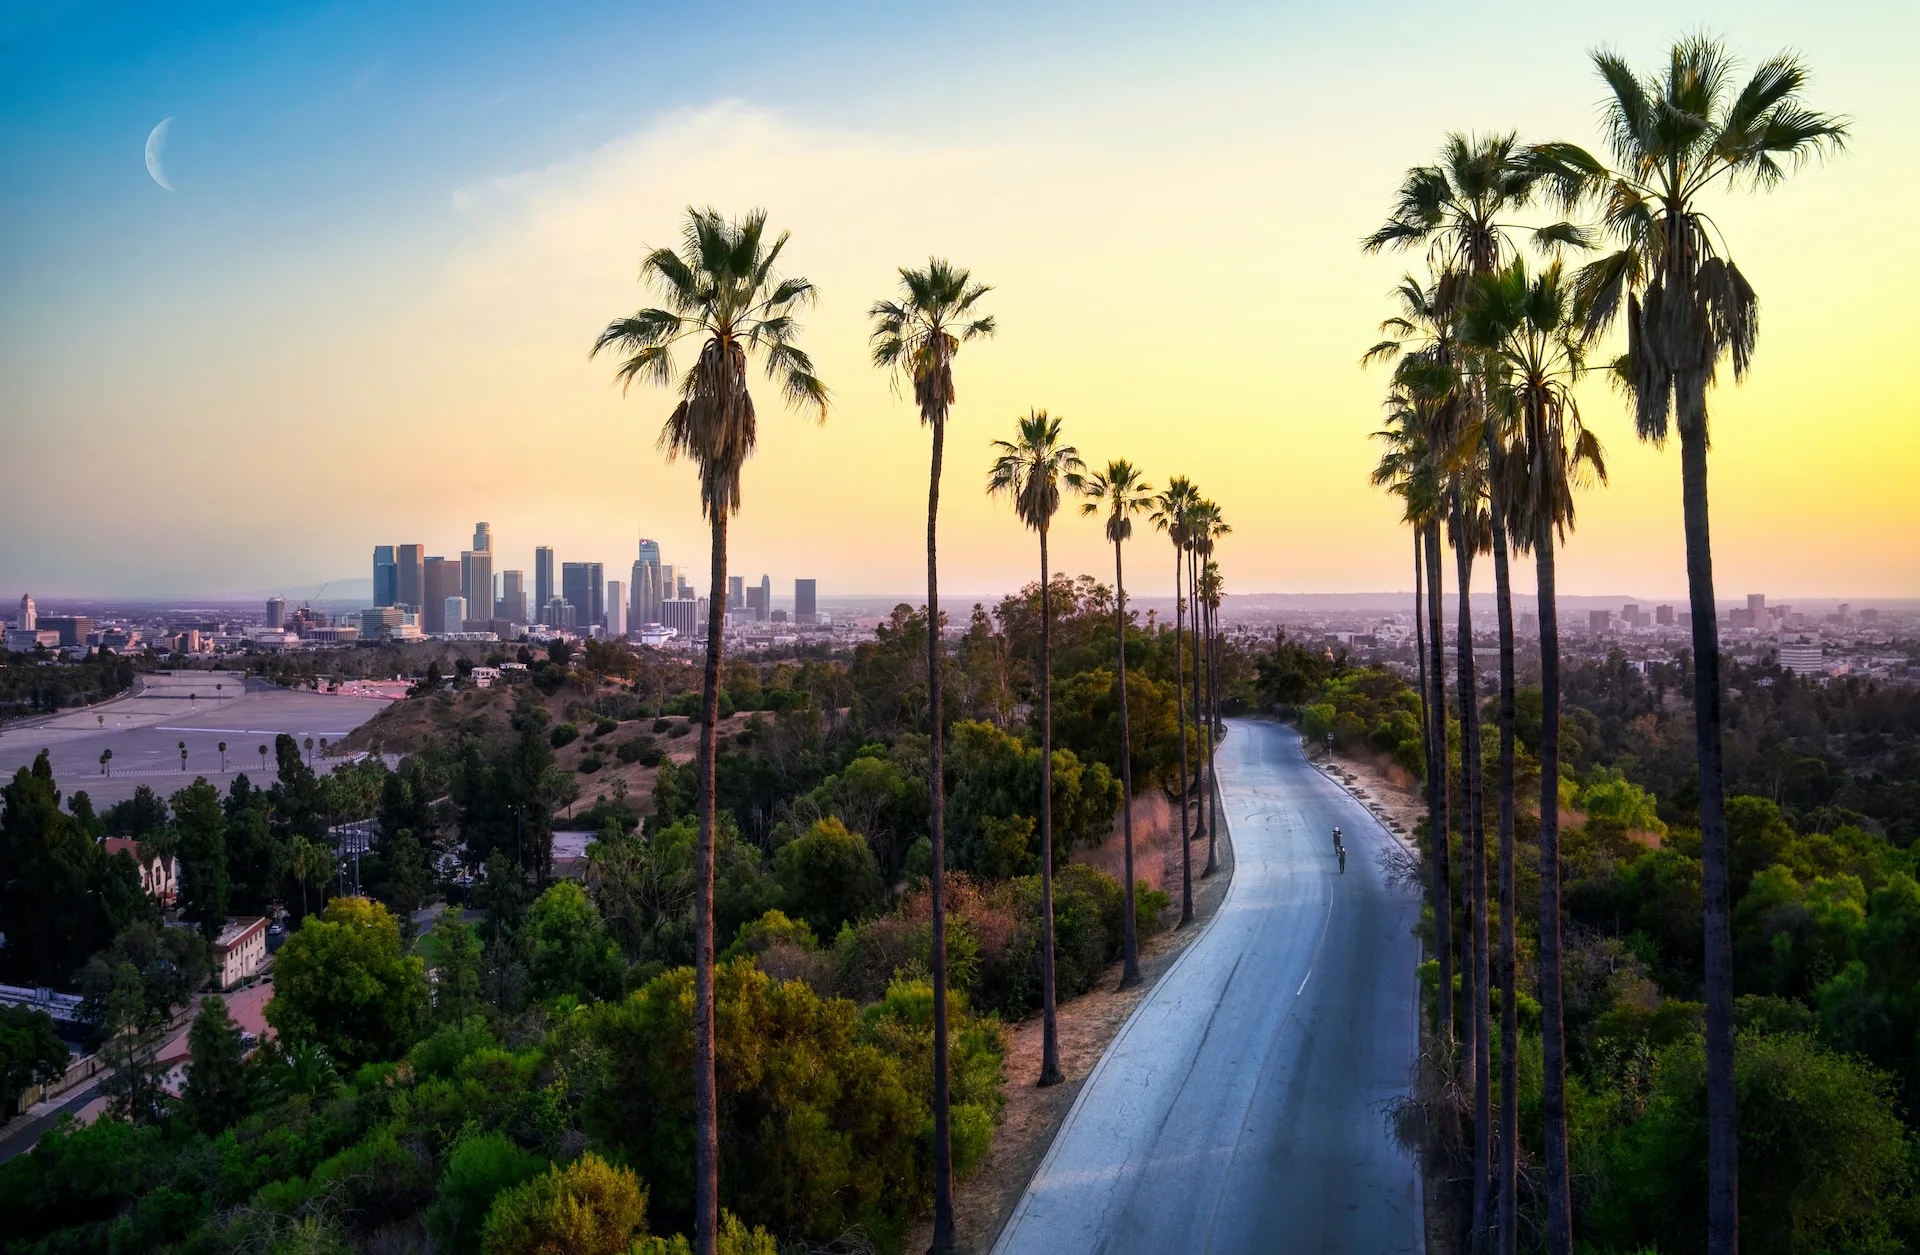 Skyline of Los Angeles with palm trees and sun setting